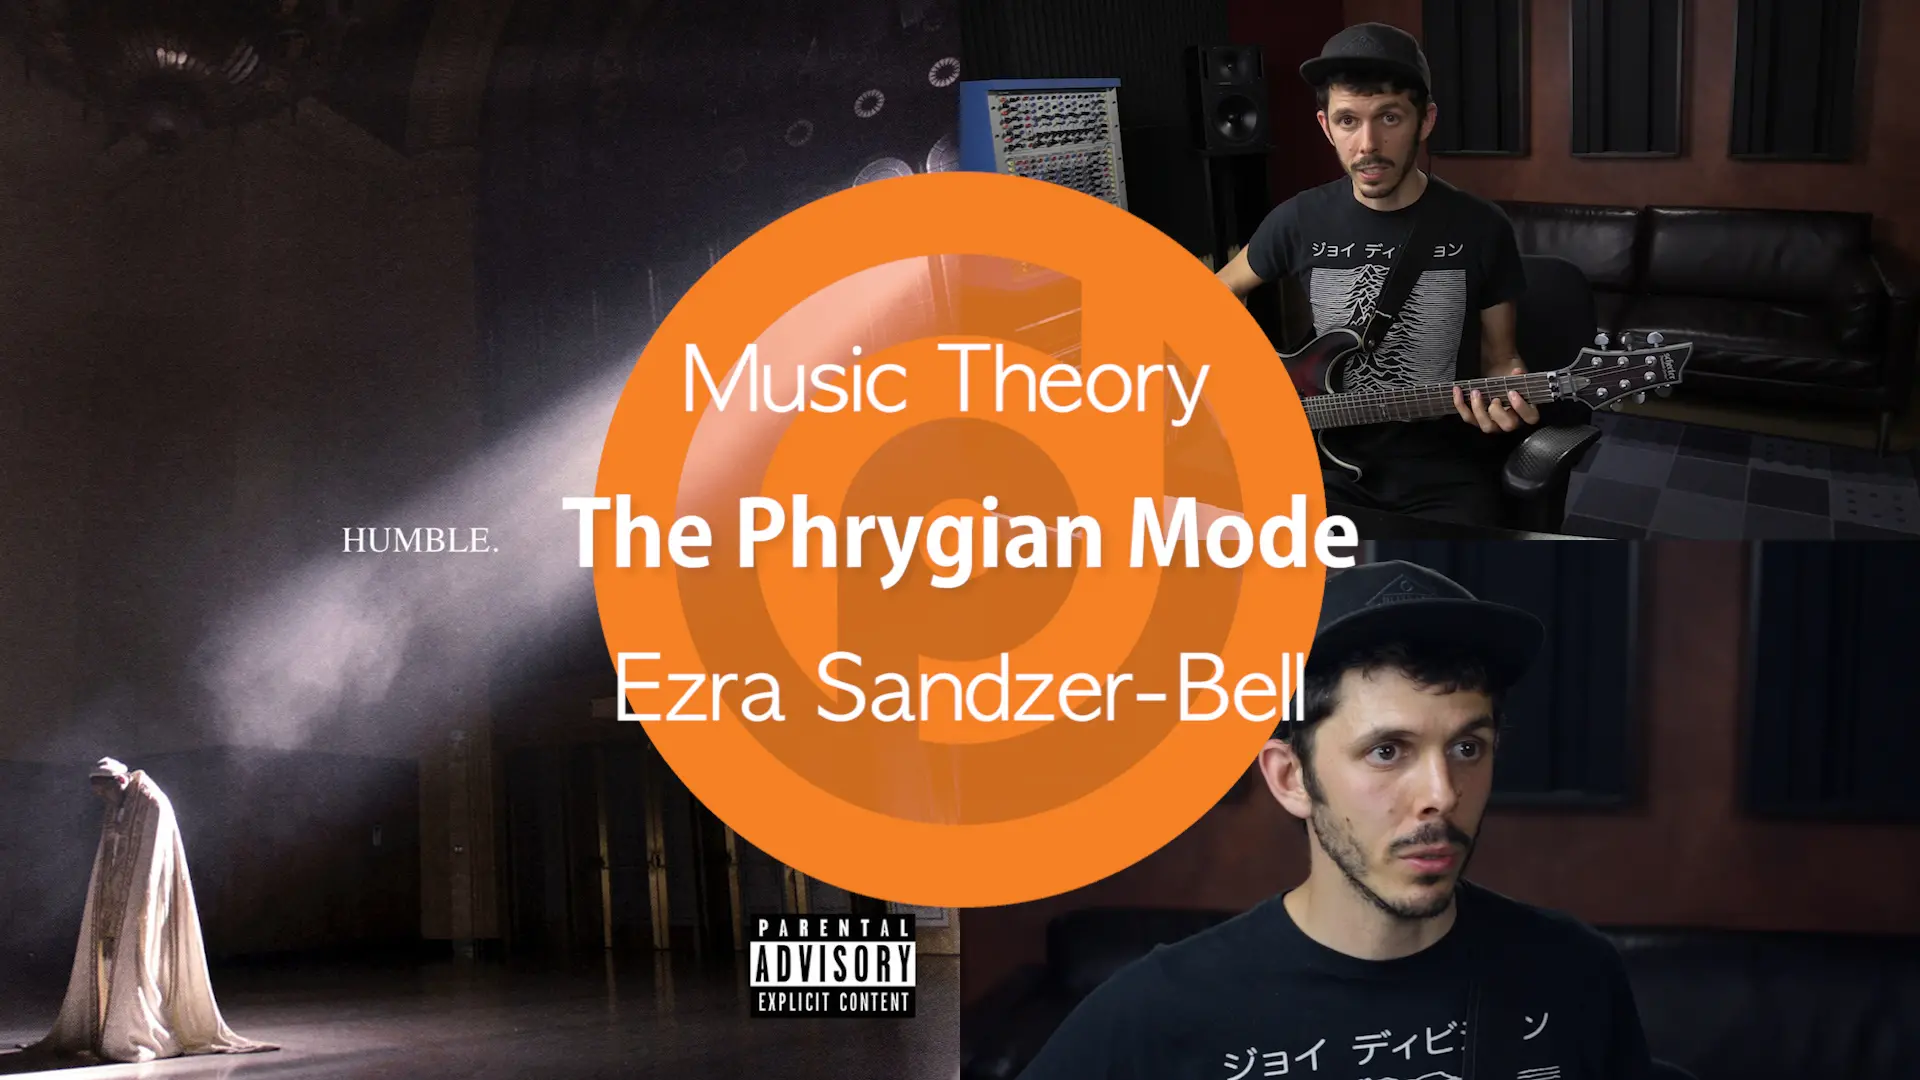 Music producer specializing in the physican mode era and Sanchez-Bel, offering expertise in music theory and beatmaking.